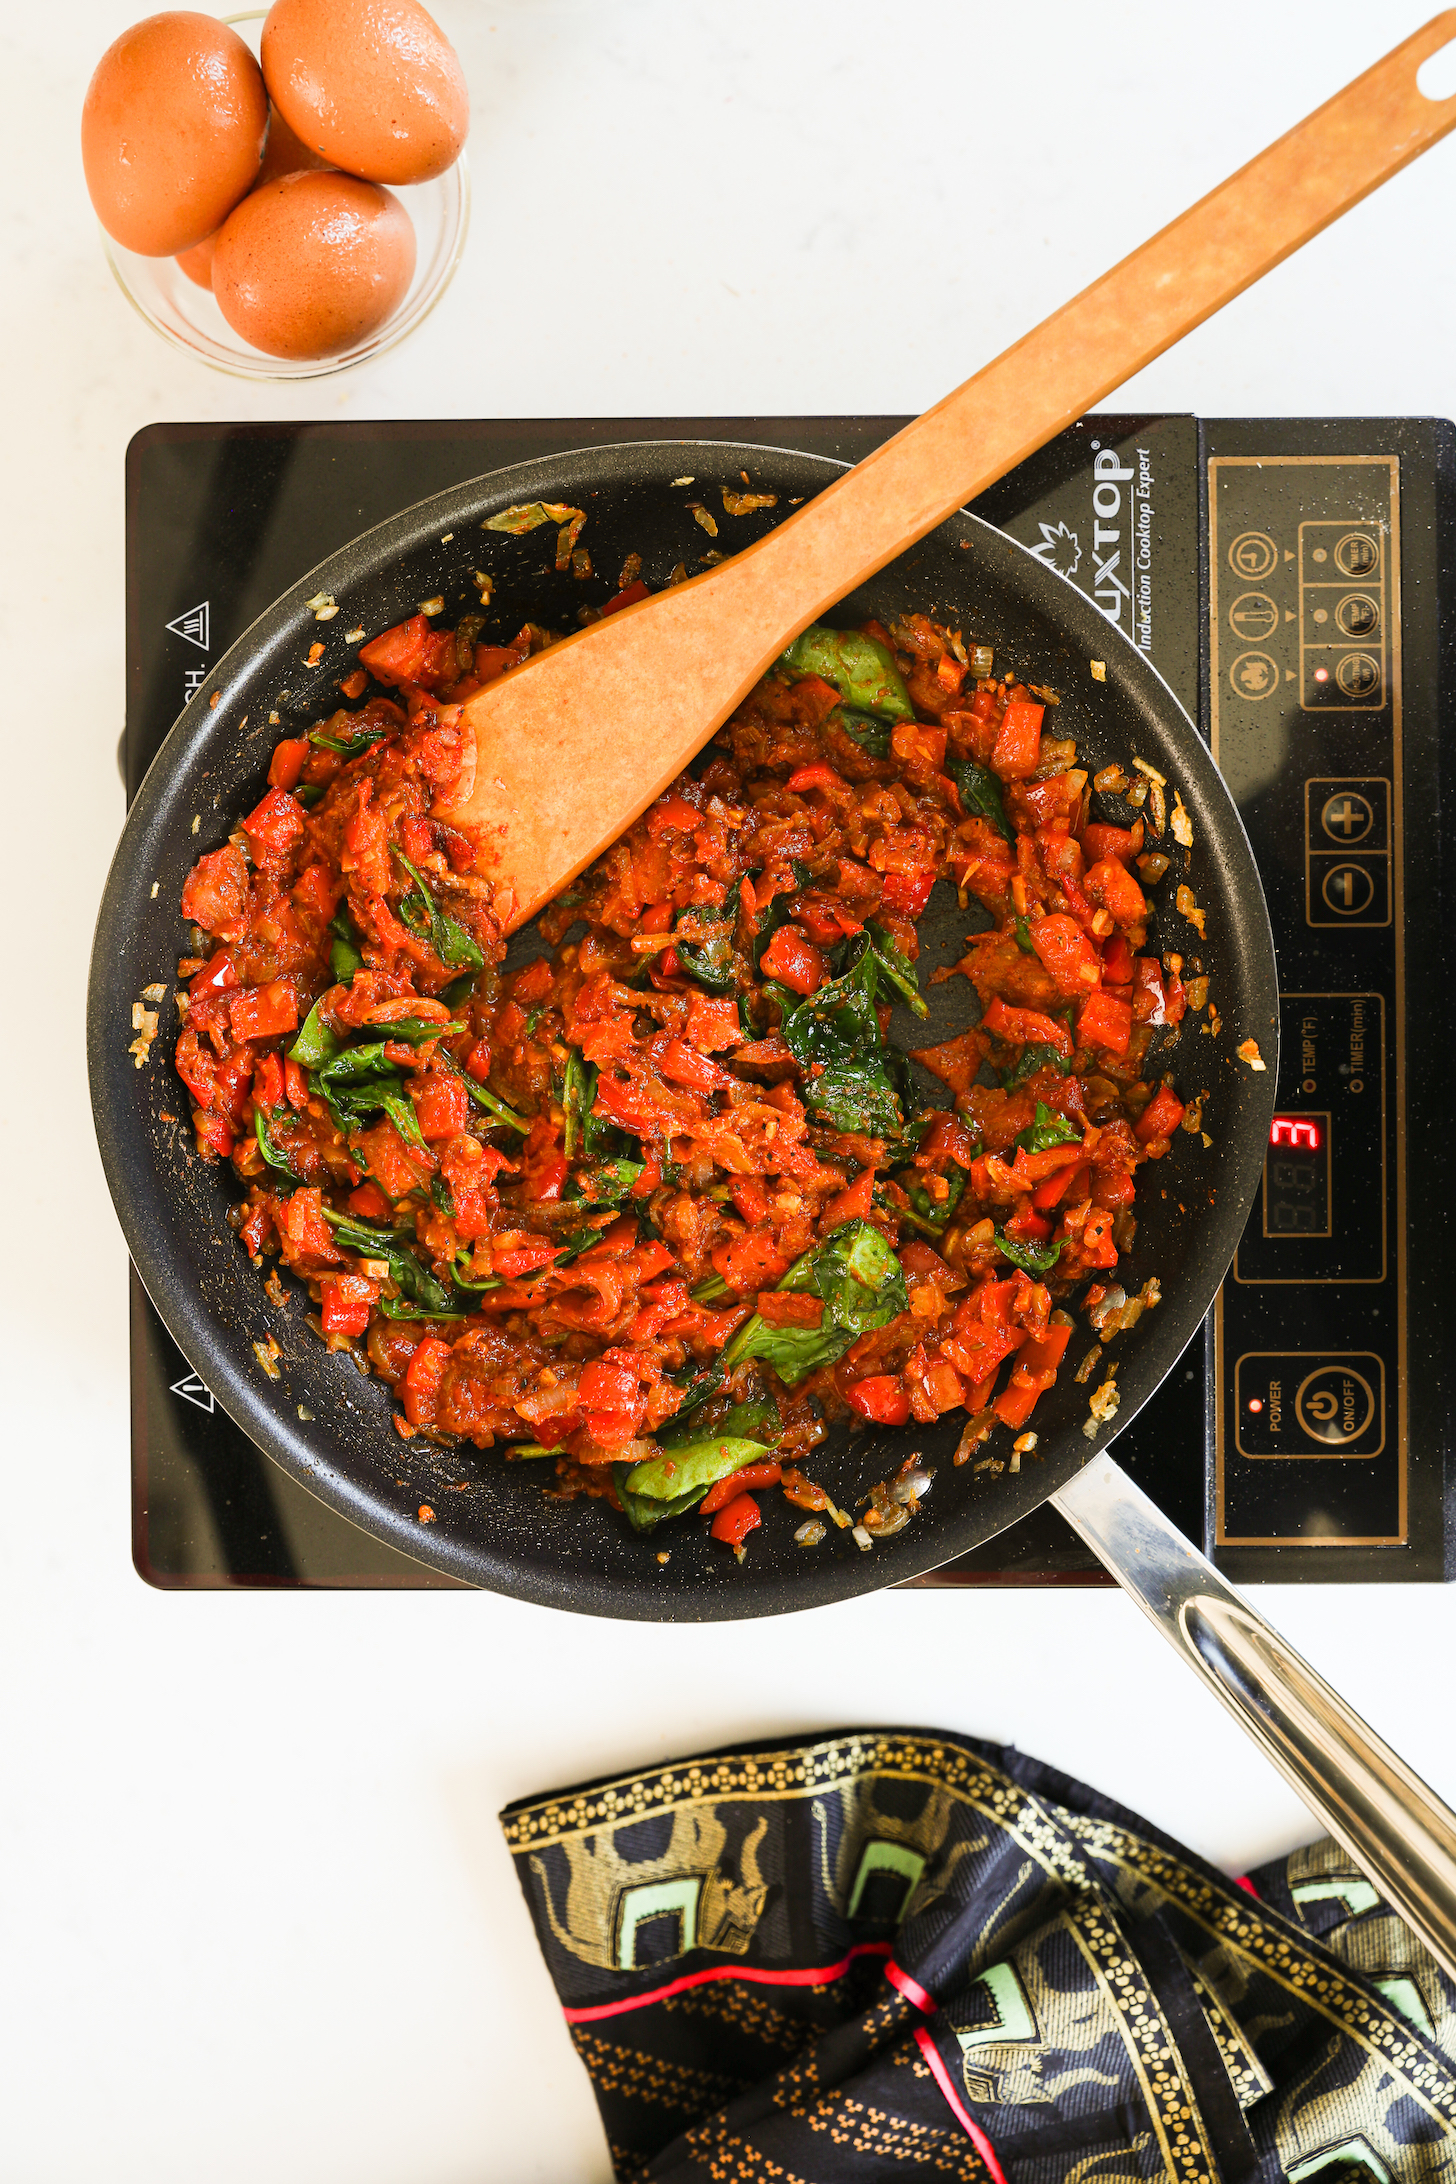 Image of a pan on a portable stove with cooked tomatoes peppers and greens inside. There is a bowl of eggs nearby.